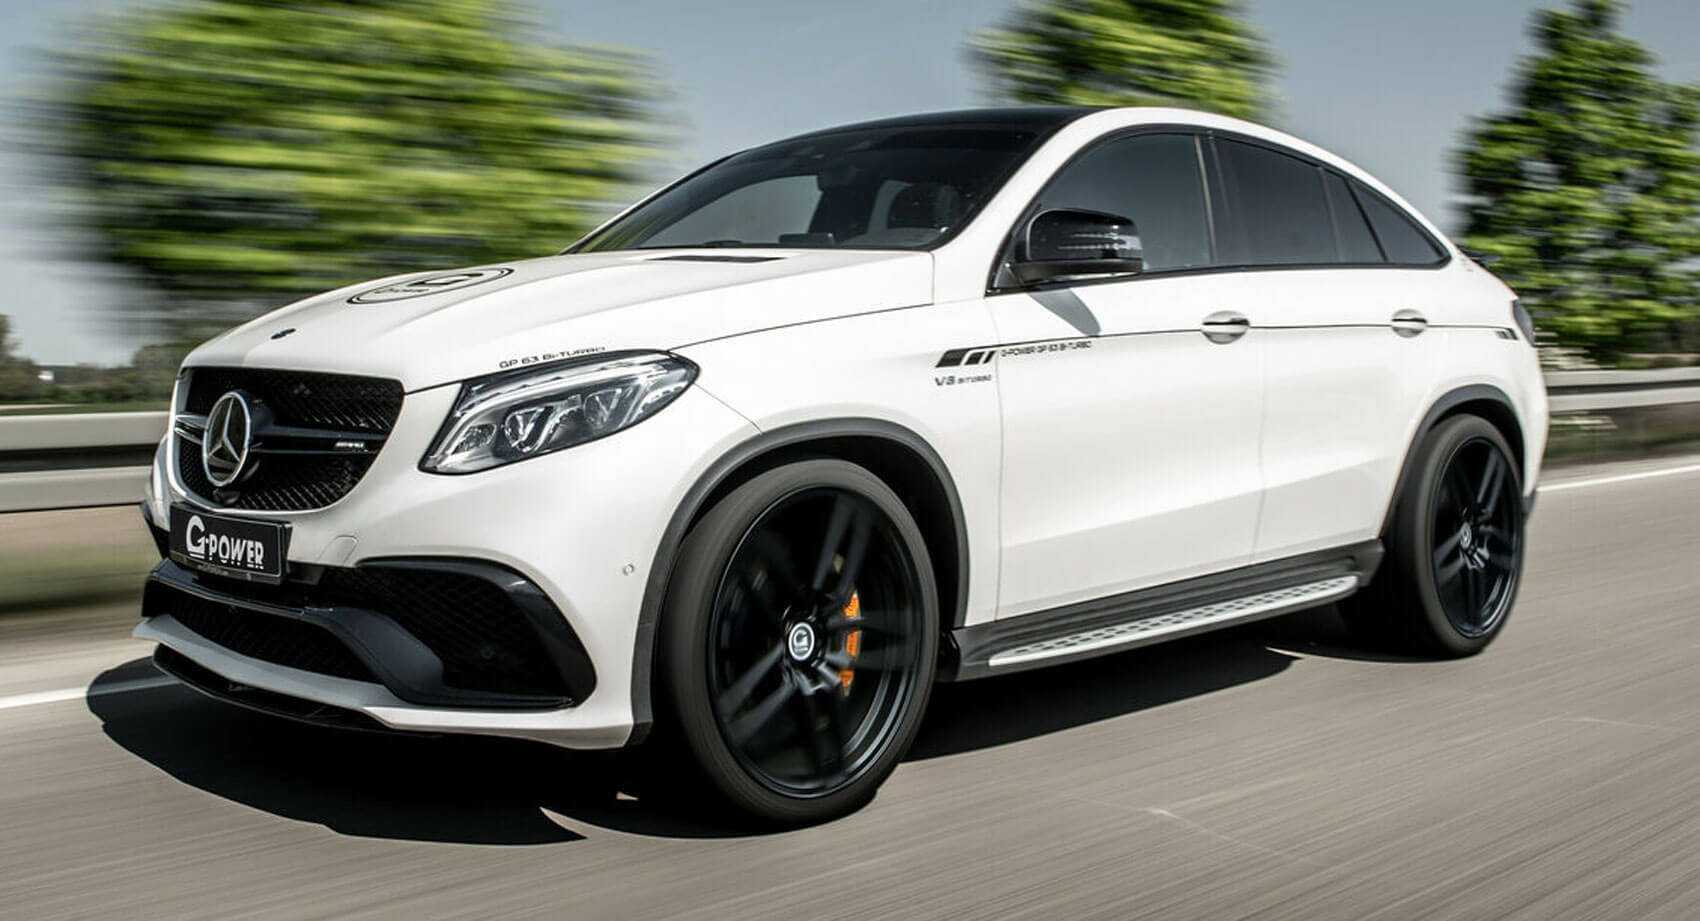 GPower Pumps Up The MercedesAMG GLE 63 S Coupe To 789 HP Carscoops